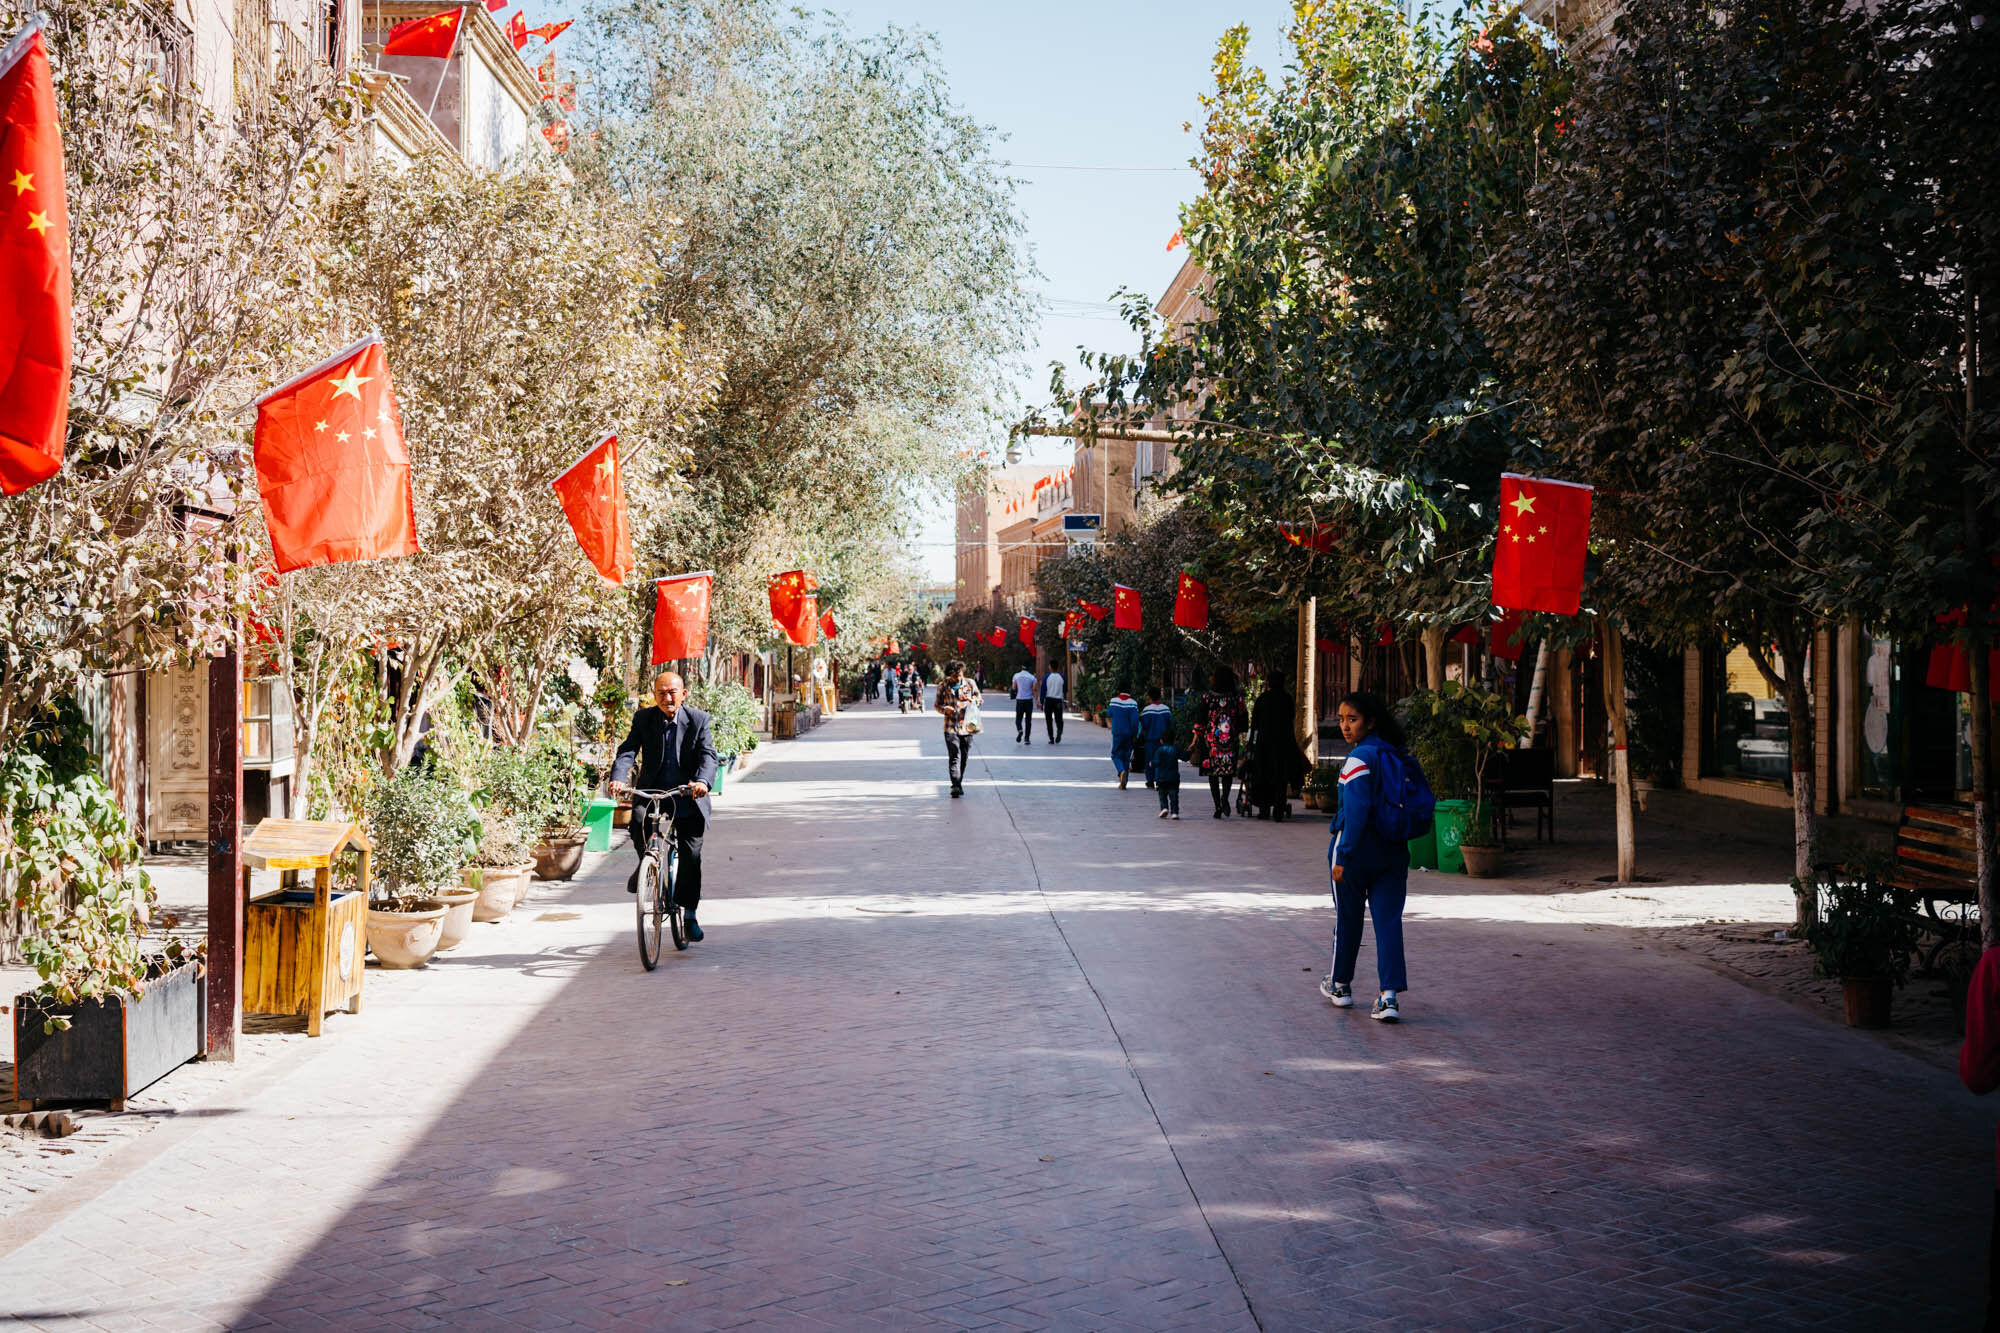  Kashgar's new 'old town'. Much of Kashgar’s original old town has been demolished in recent years in part due to poor sanitary conditions and been replaced by an ‘old style’ new old town. My visit was soon after the 70th anniversary of the People’s 